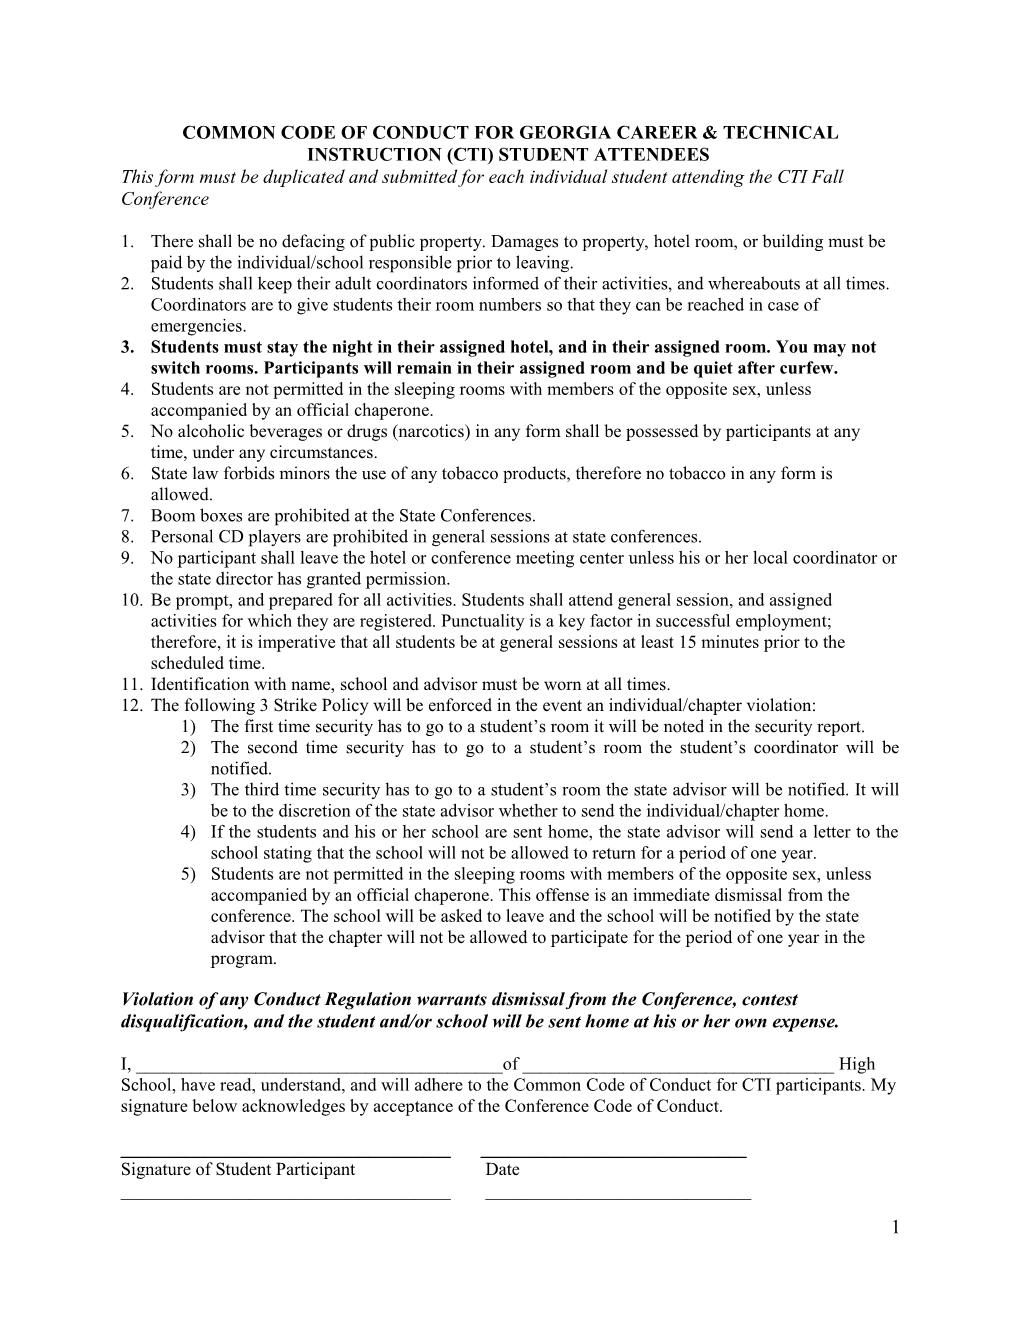 Common Code of Conduct for Georgia Career & Technical Instruction (Cti) Student Attendees